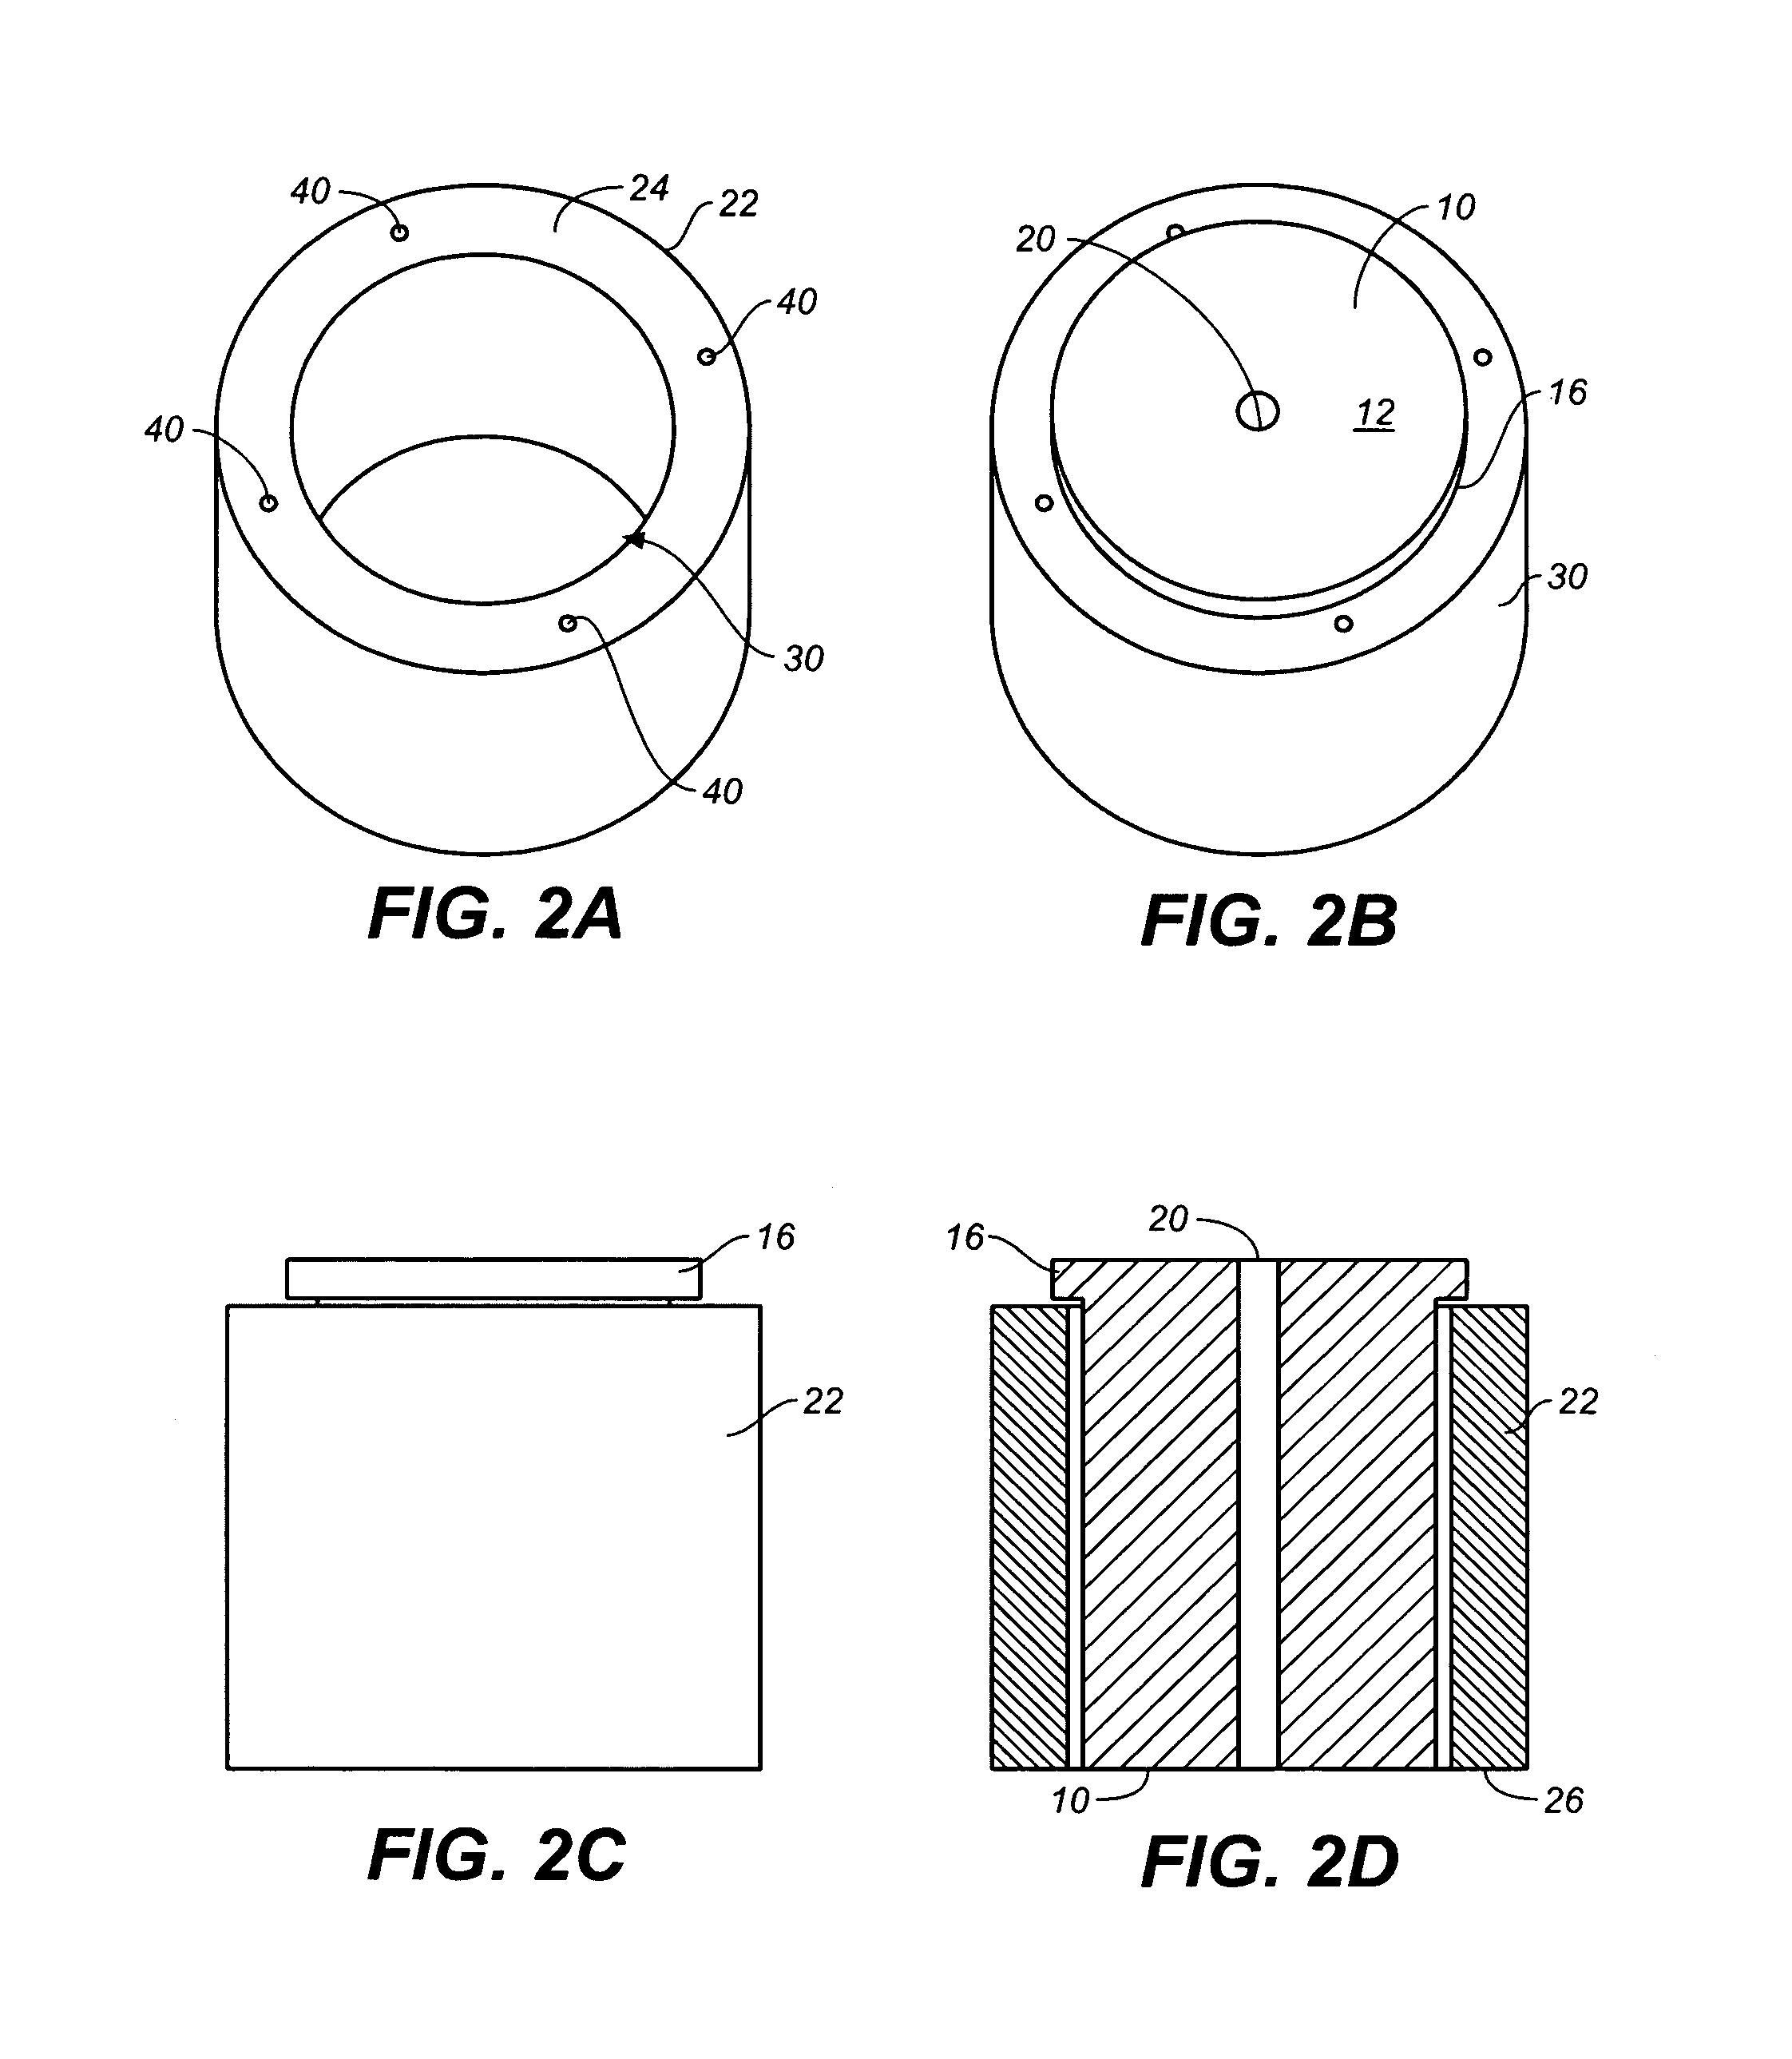 Device and method for allograft and tissue engineered osteochondral graft surface matching, preparation, and implantation